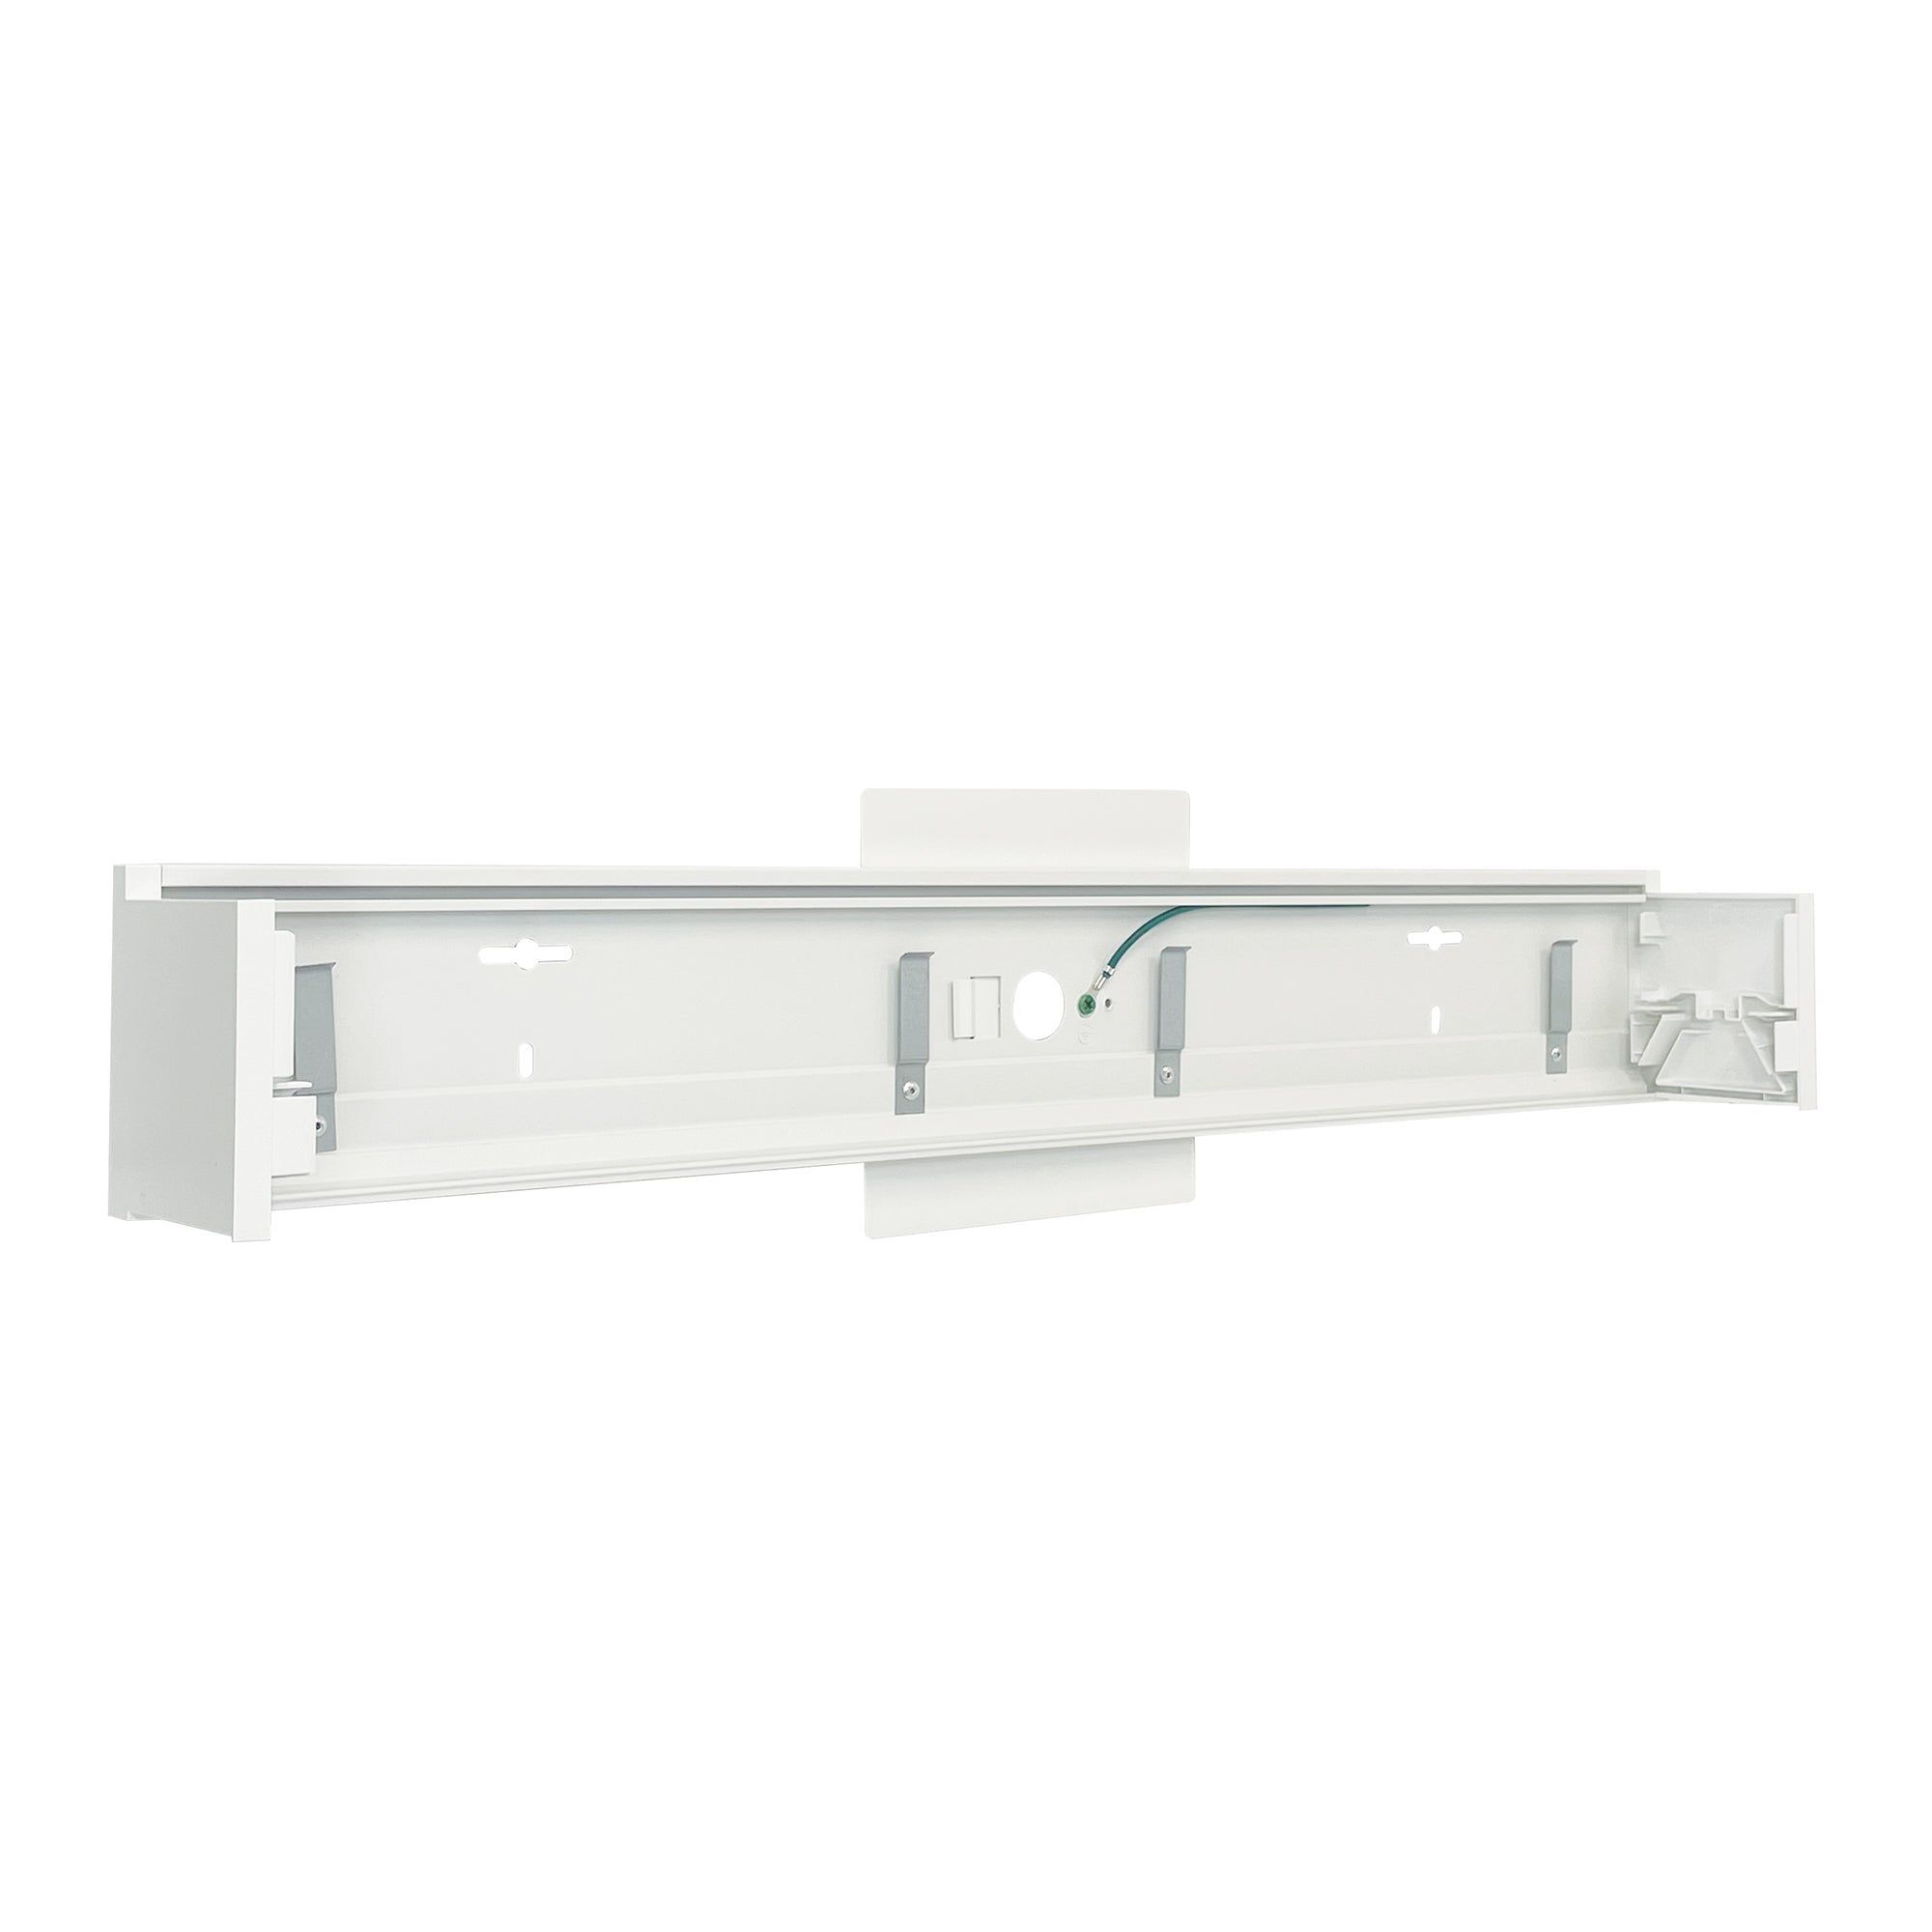 Nora Lighting NLUD-8WMW - Linear - 8' Wall Mount Kit for NLUD-8334, White Finish